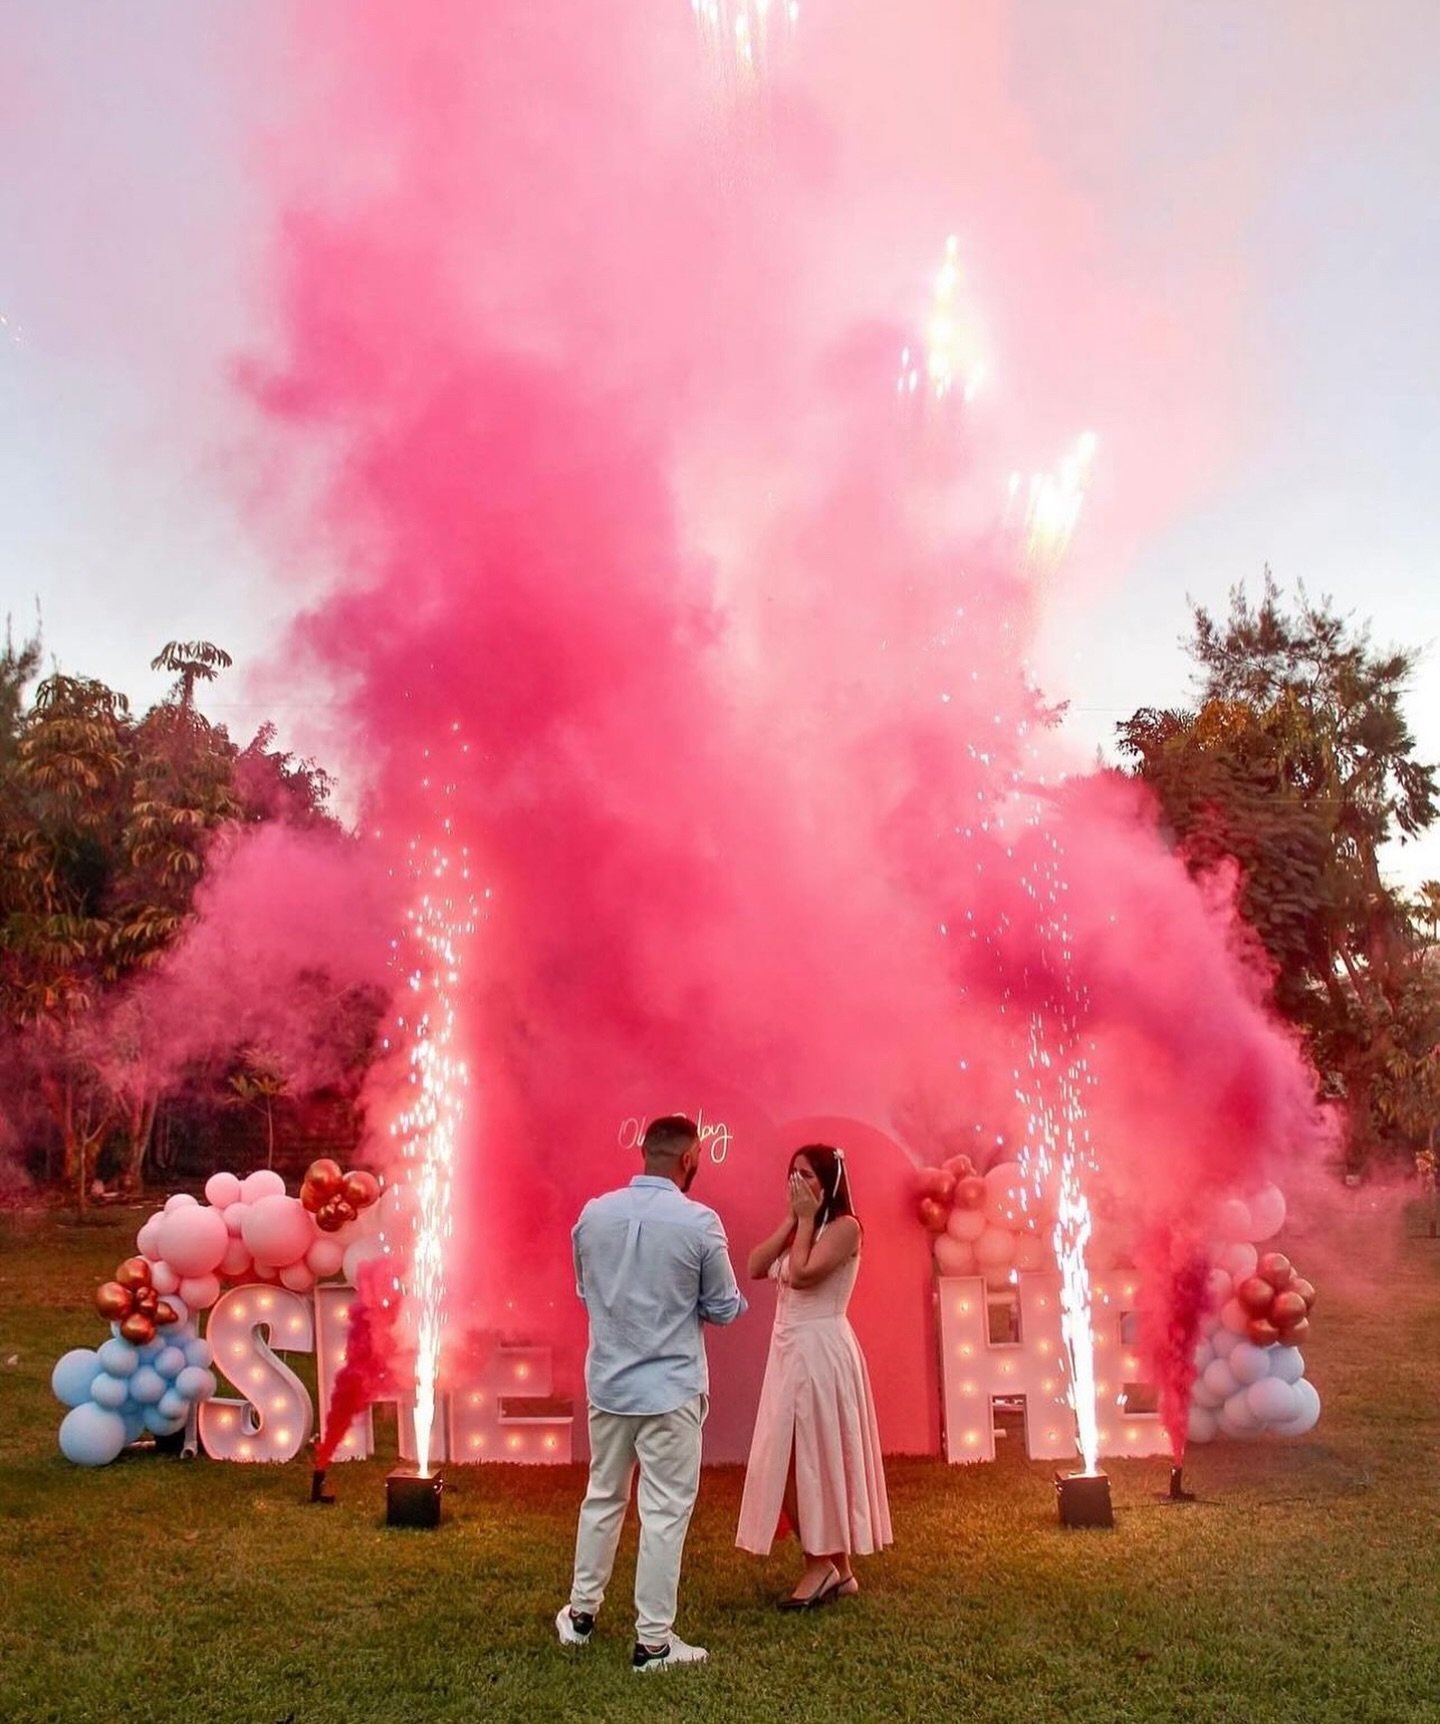 cold sparklers + extinguishers + smoke bombs = the perfect reveal 🎀🩷💖💕💞💓💗